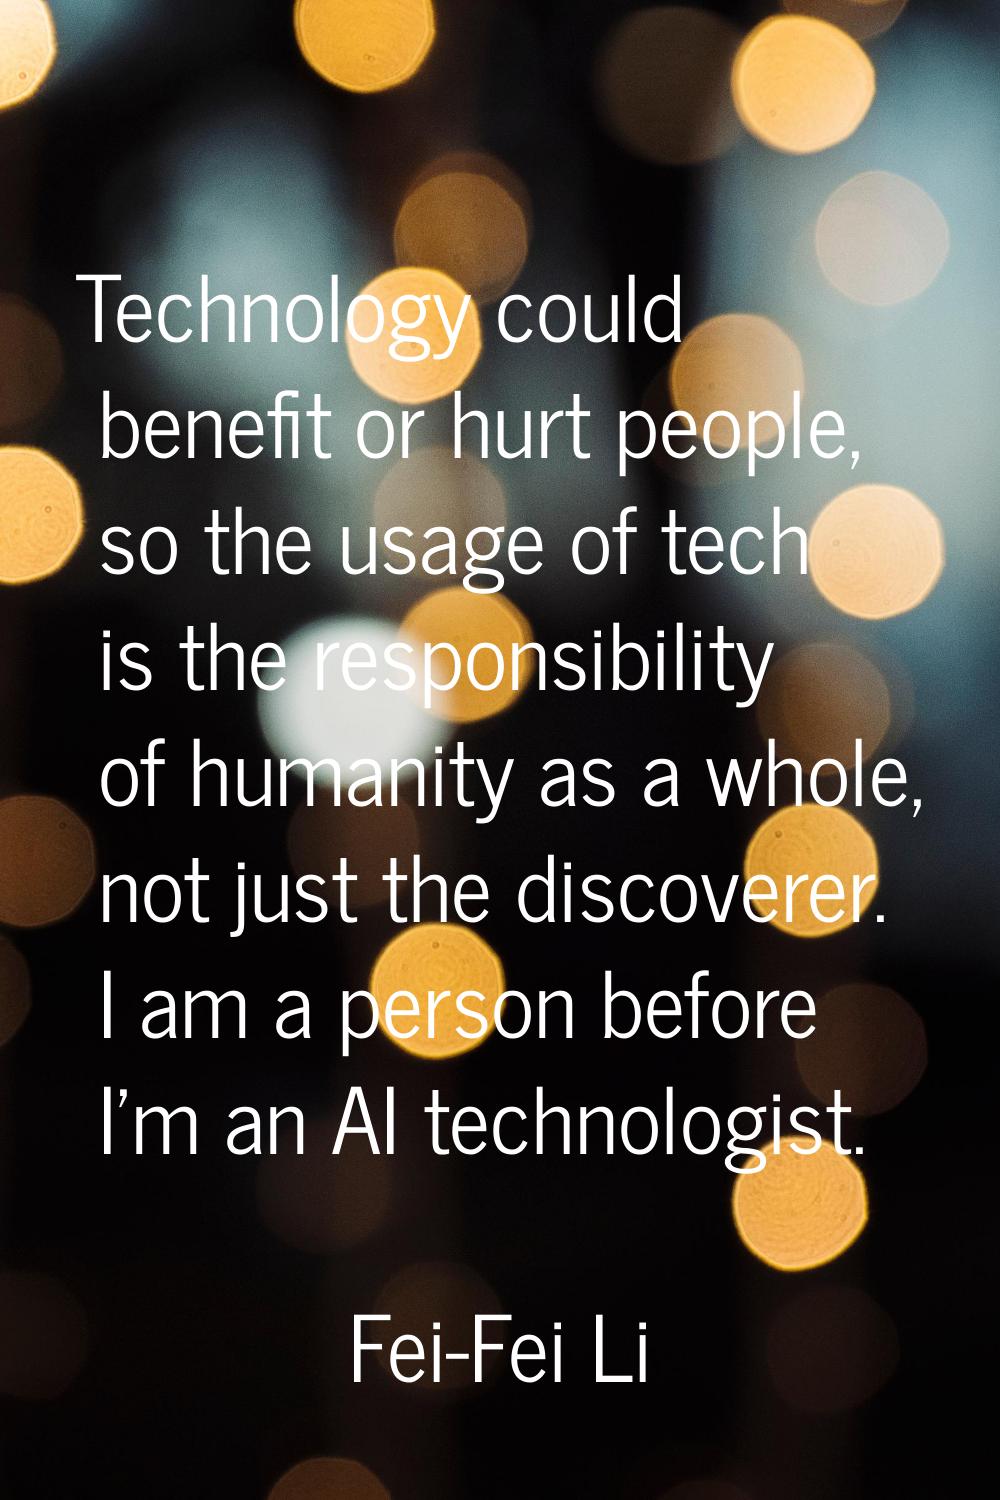 Technology could benefit or hurt people, so the usage of tech is the responsibility of humanity as 